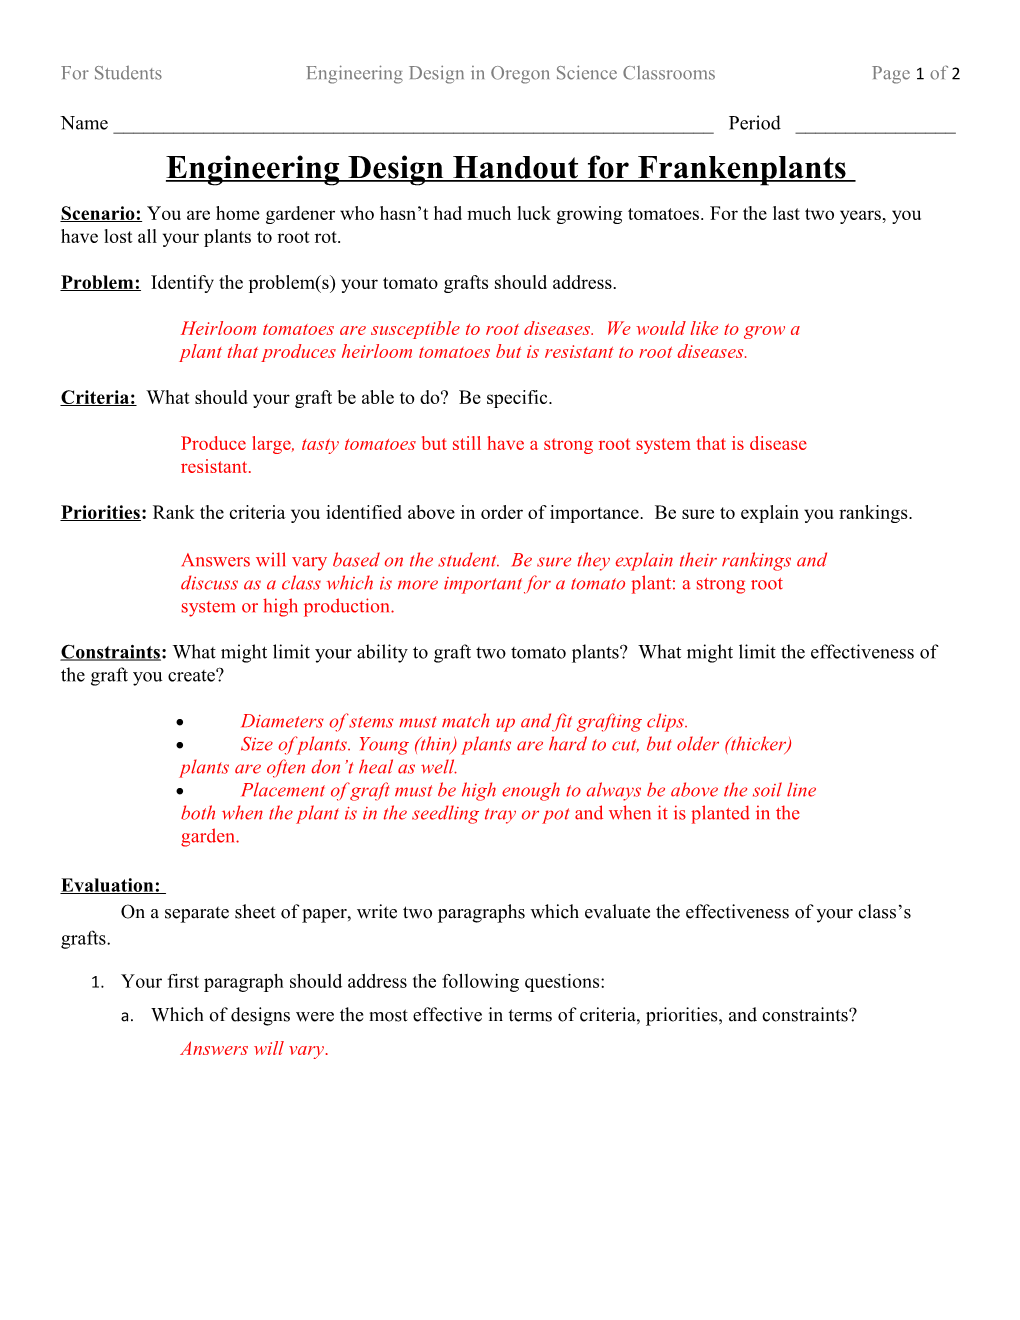 For Students Engineering Design in Oregon Science Classrooms Page 2 of 2